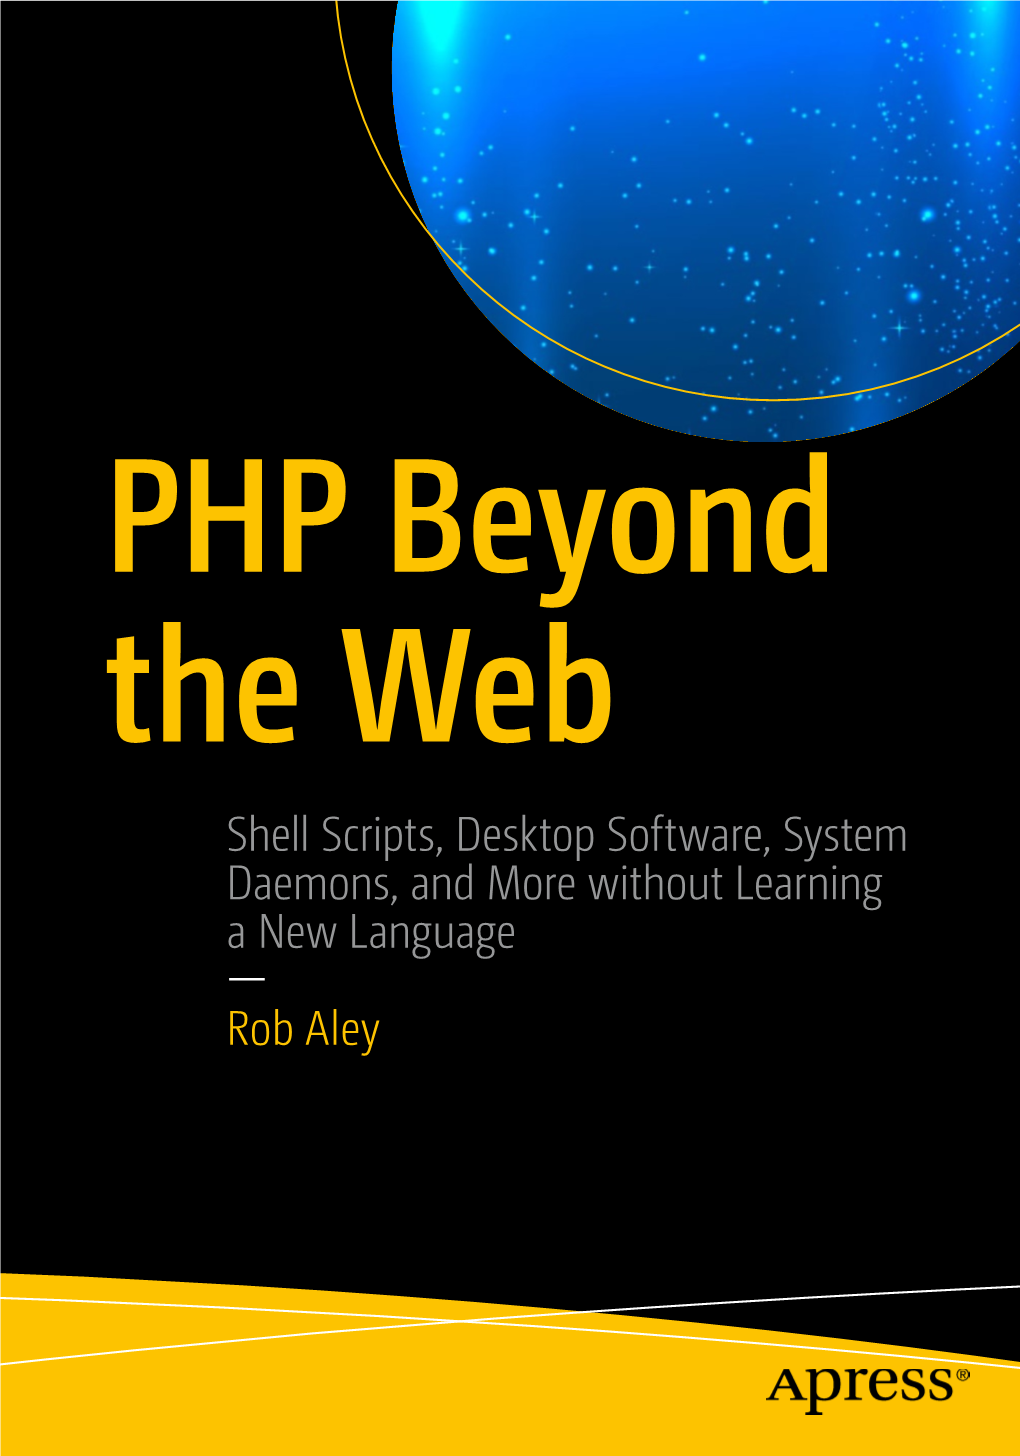 Shell Scripts, Desktop Software, System Daemons, and More Without Learning a New Language — Rob Aley PHP Beyond the Web